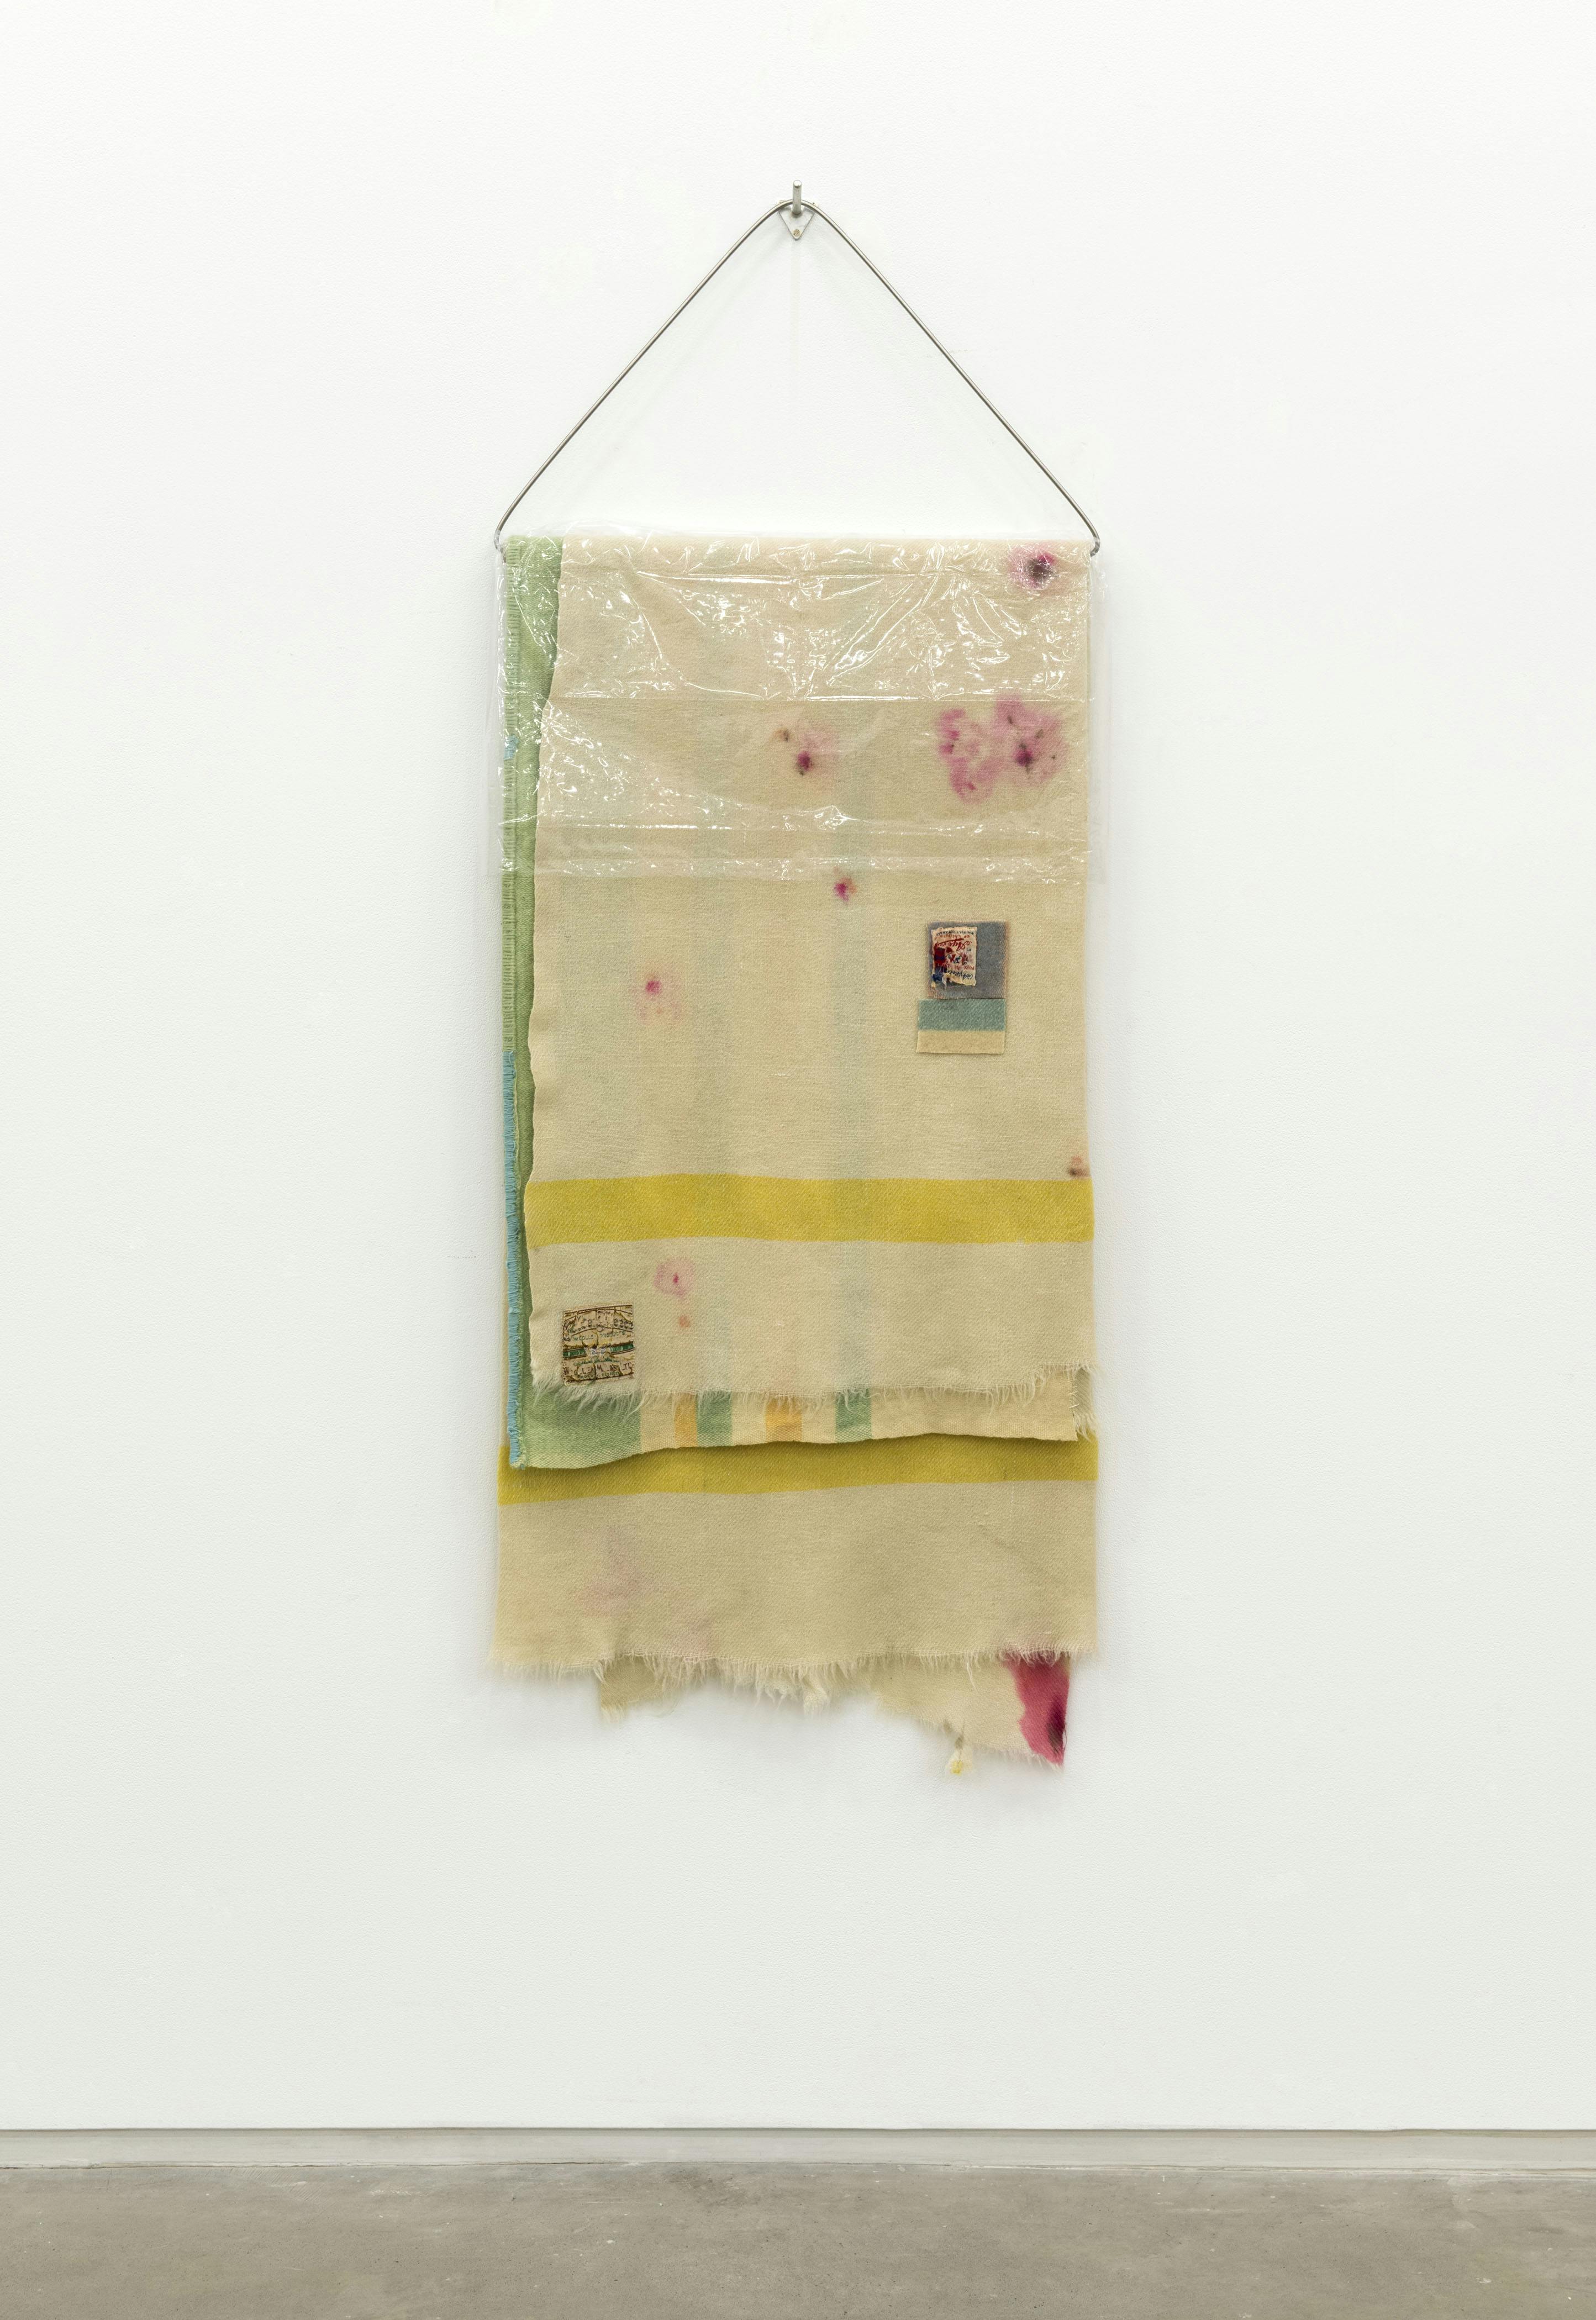 A cream coloured textile with yellow and green stripes hangs from a triangular metal armature mounted on a gallery wall. Pink splotches and small patches of textiles are scattered around the surface. 